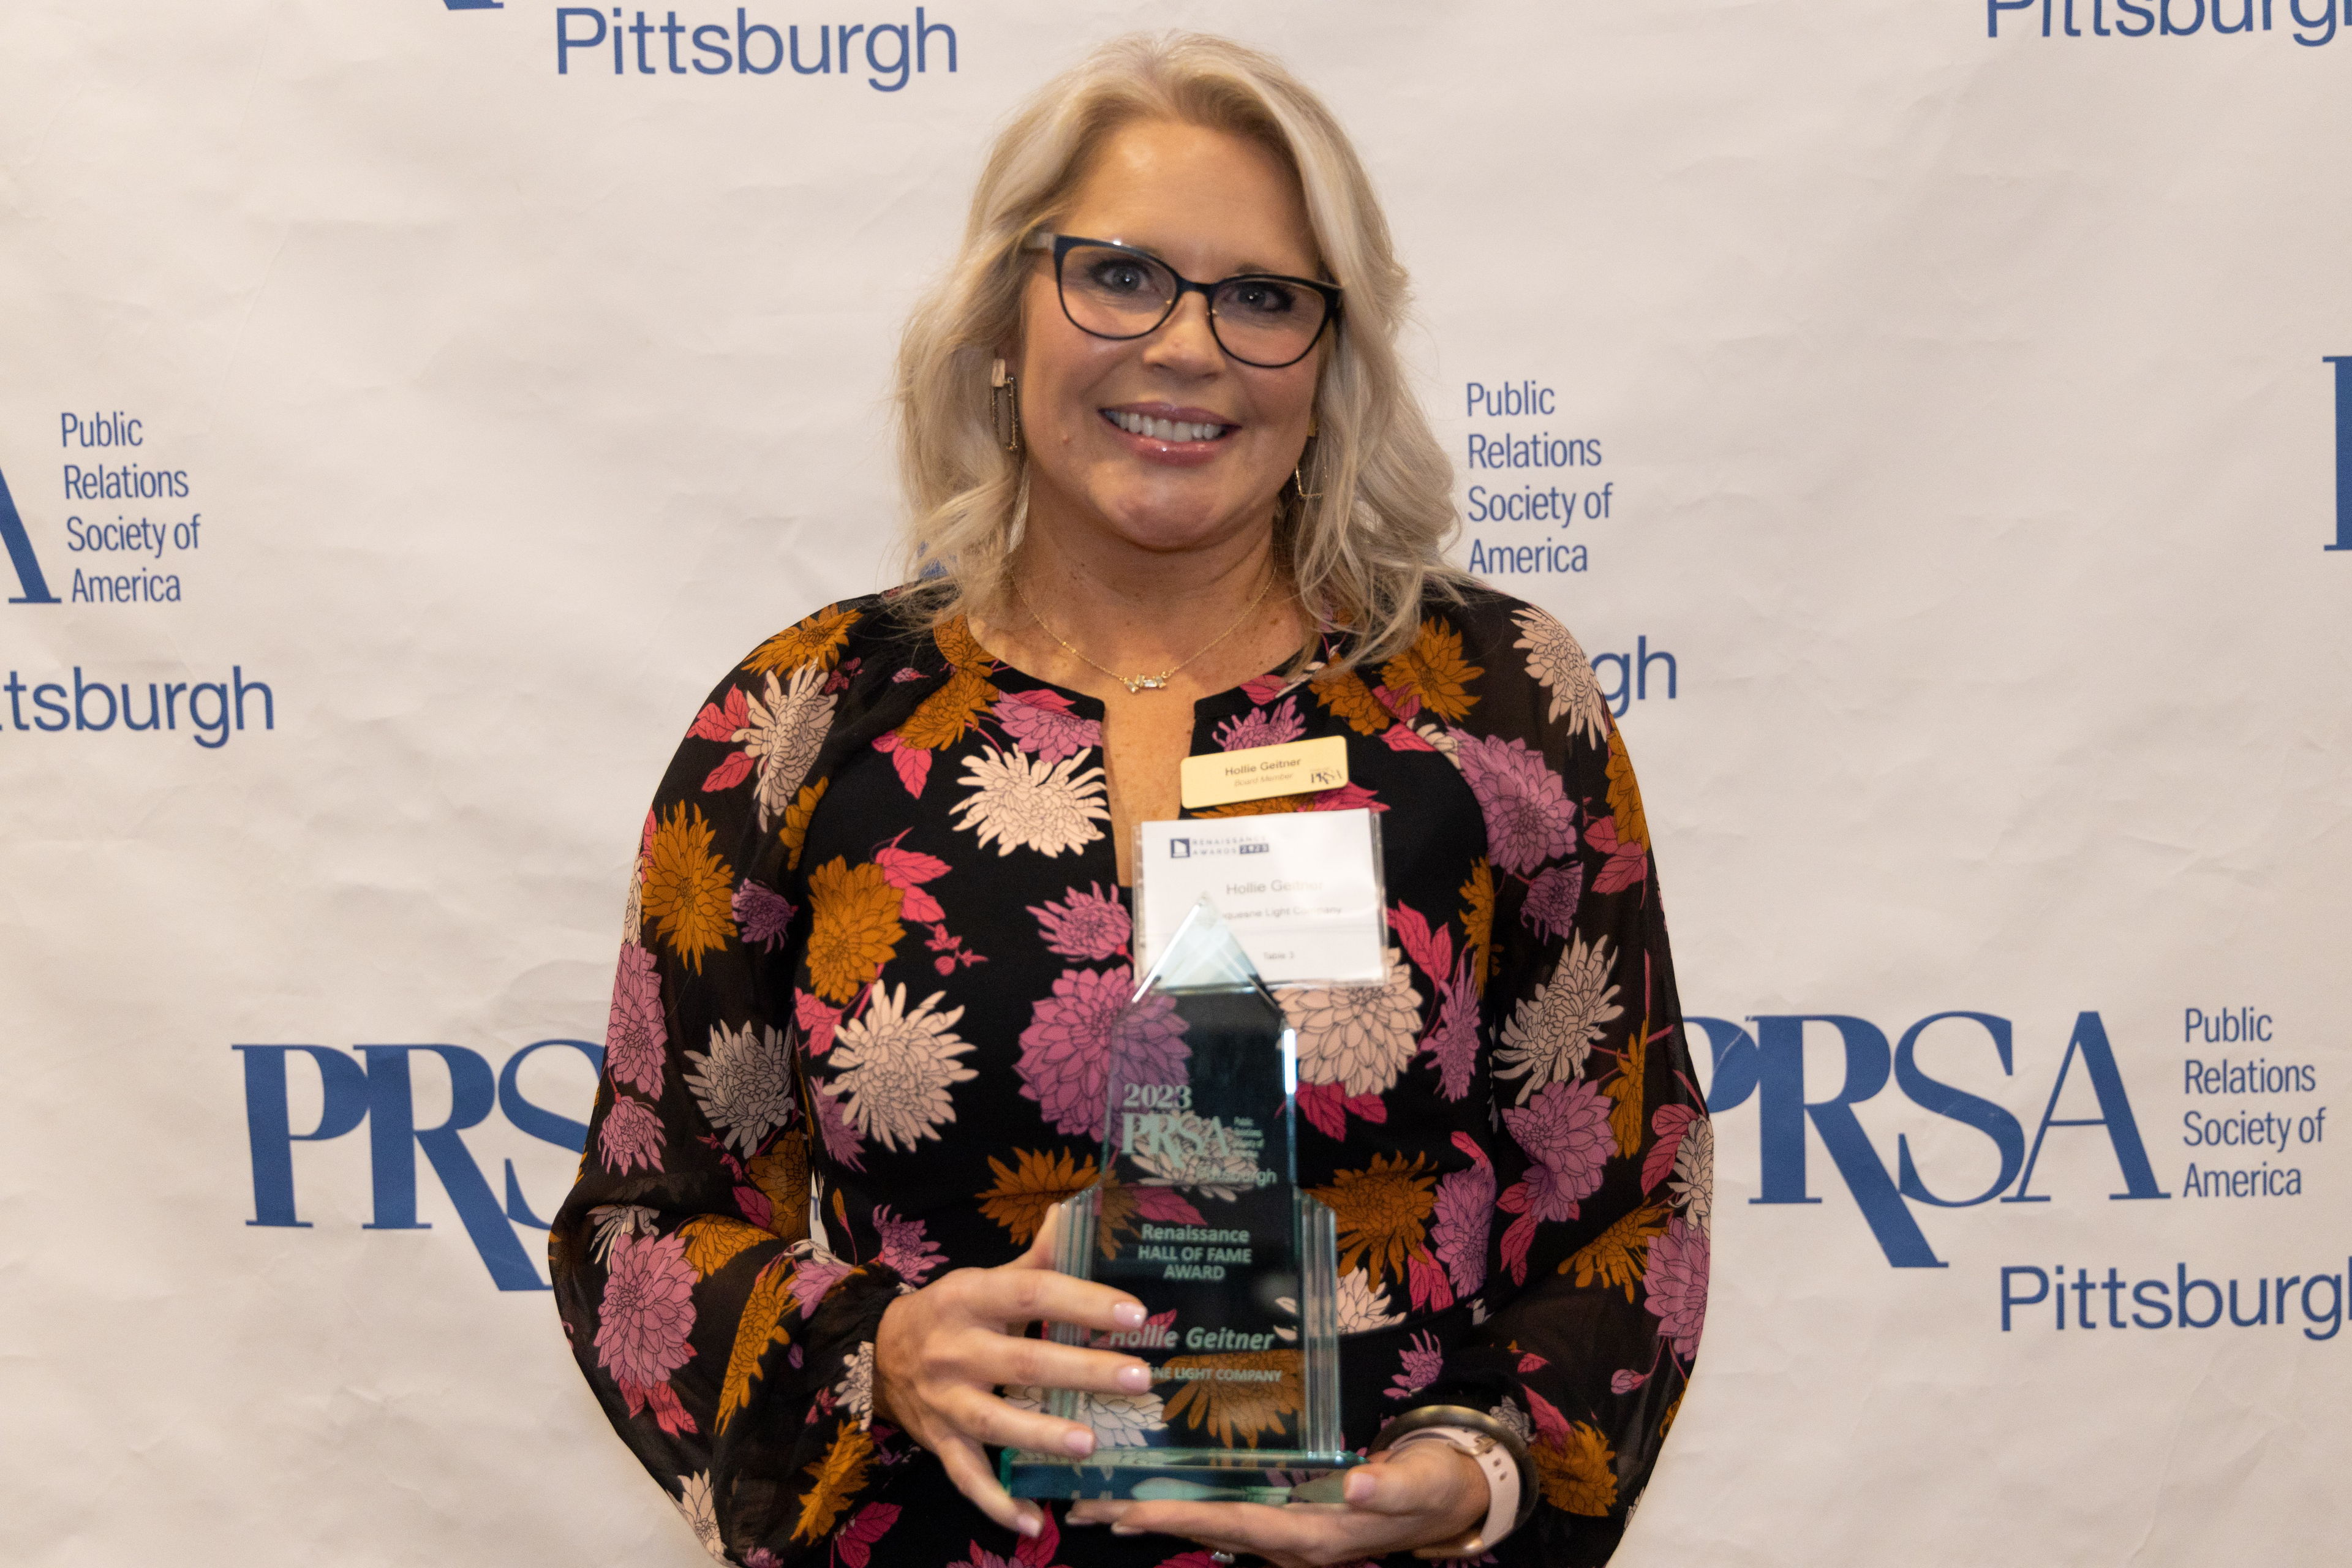 Duquesne Light Company’s Director of Communications and Brand Receives PRSA Pittsburgh Hall of Fame Award